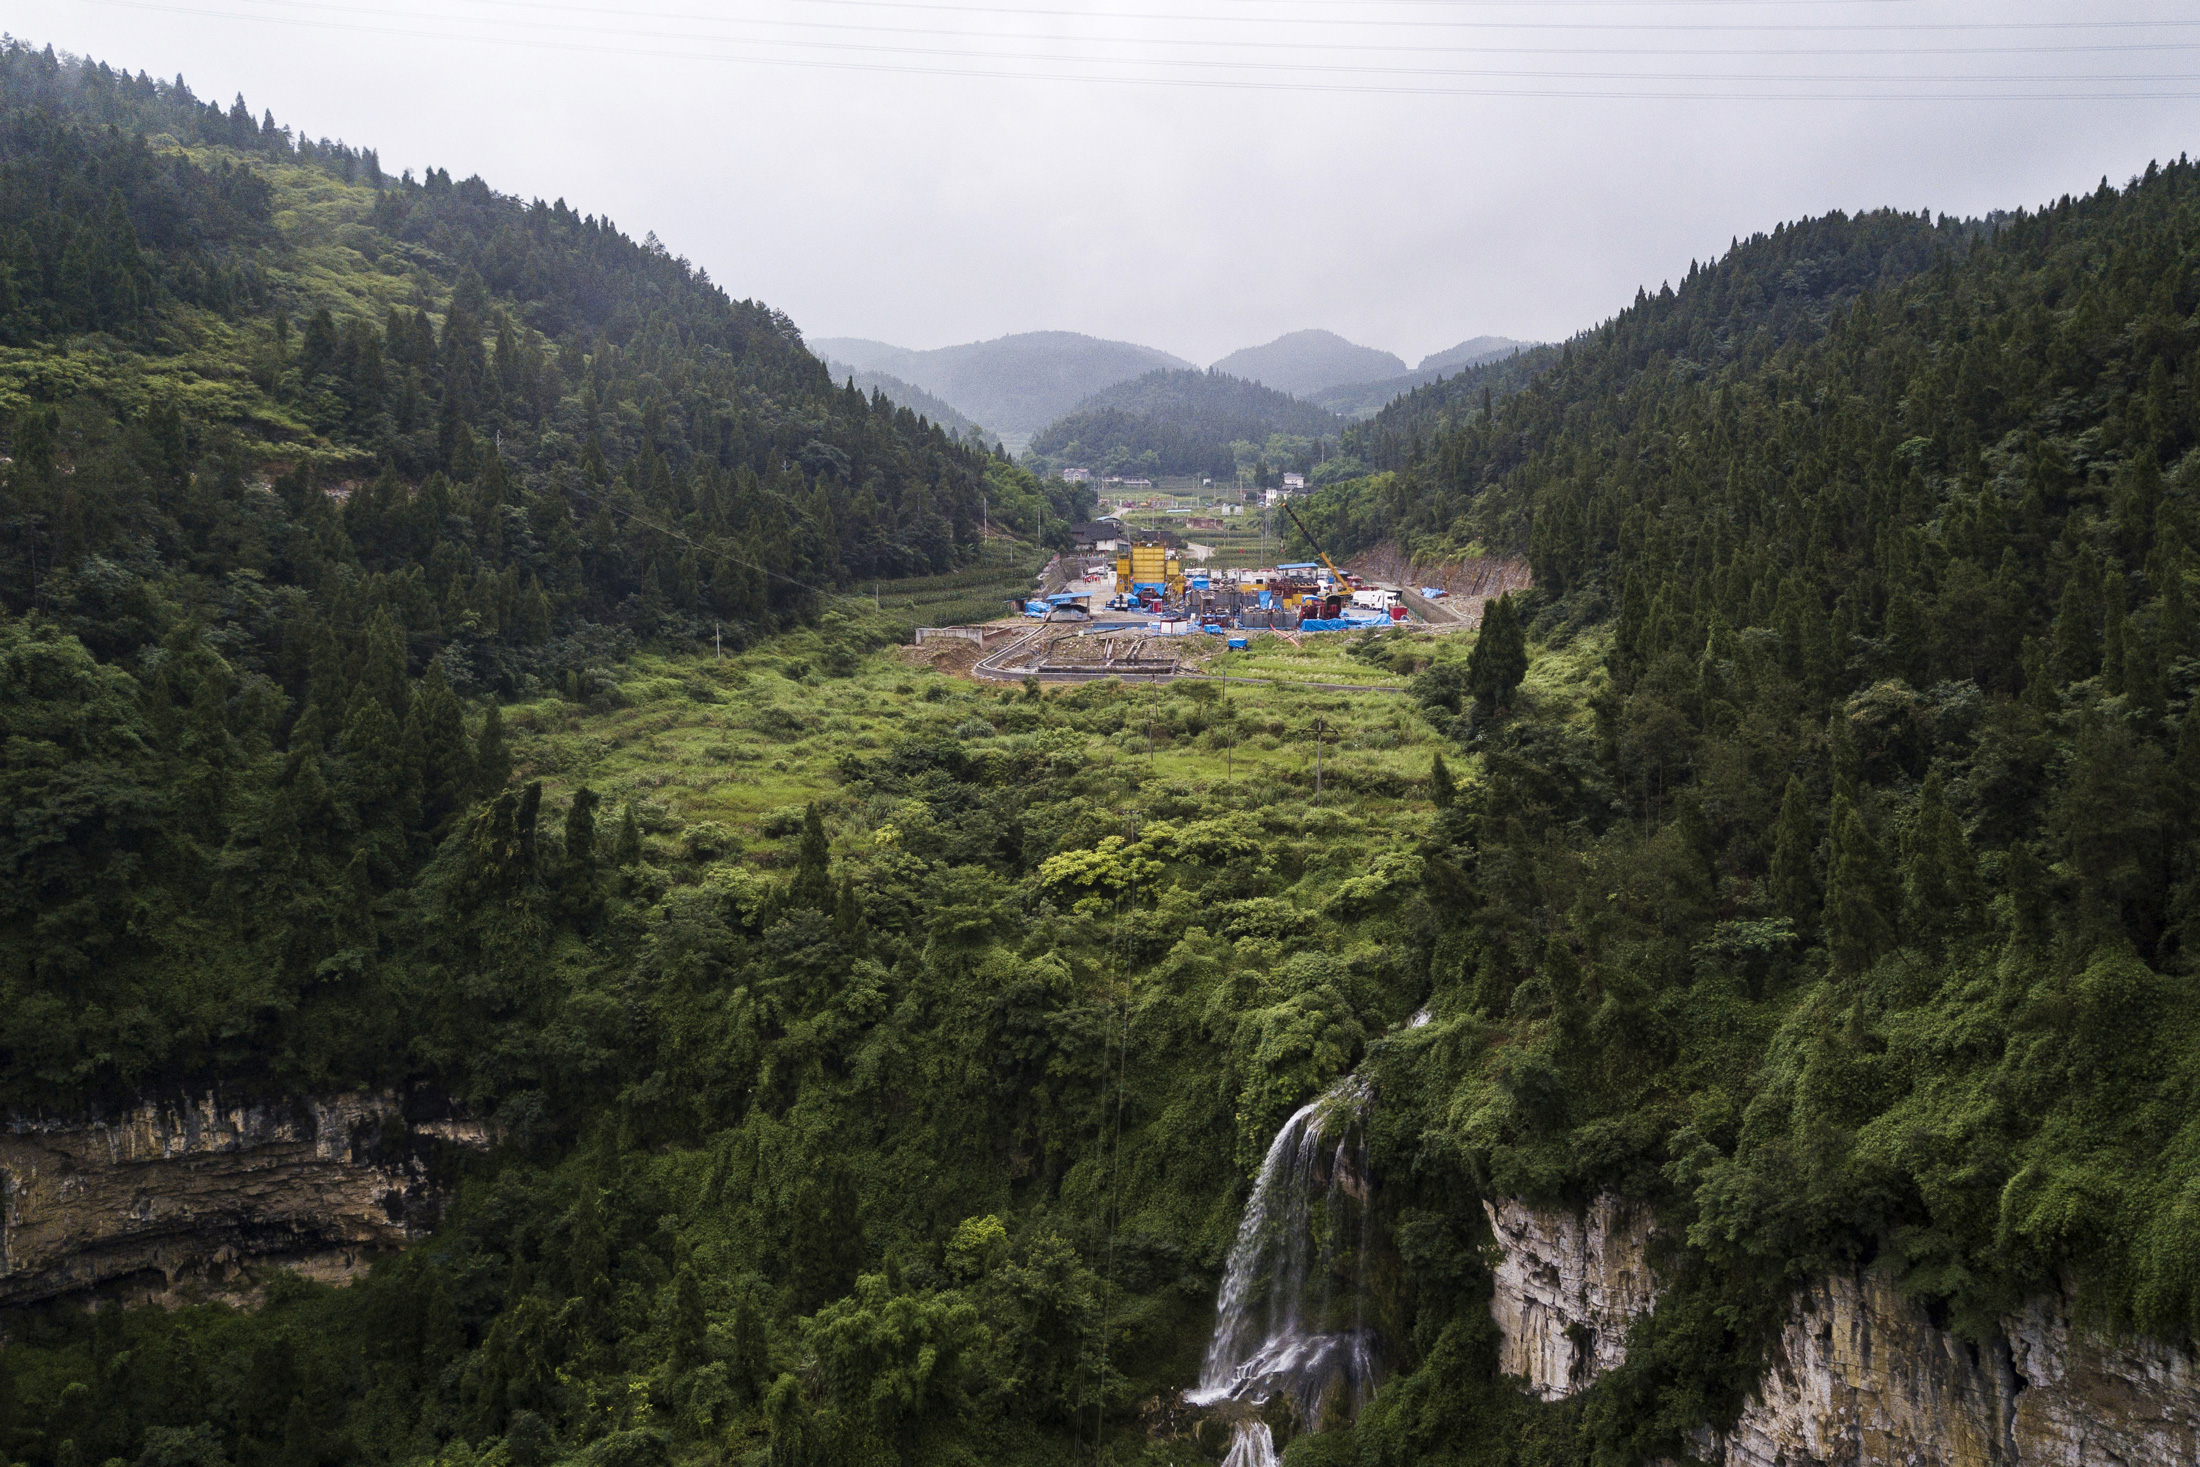 A Sinopec drilling site in the Fuling shale field.